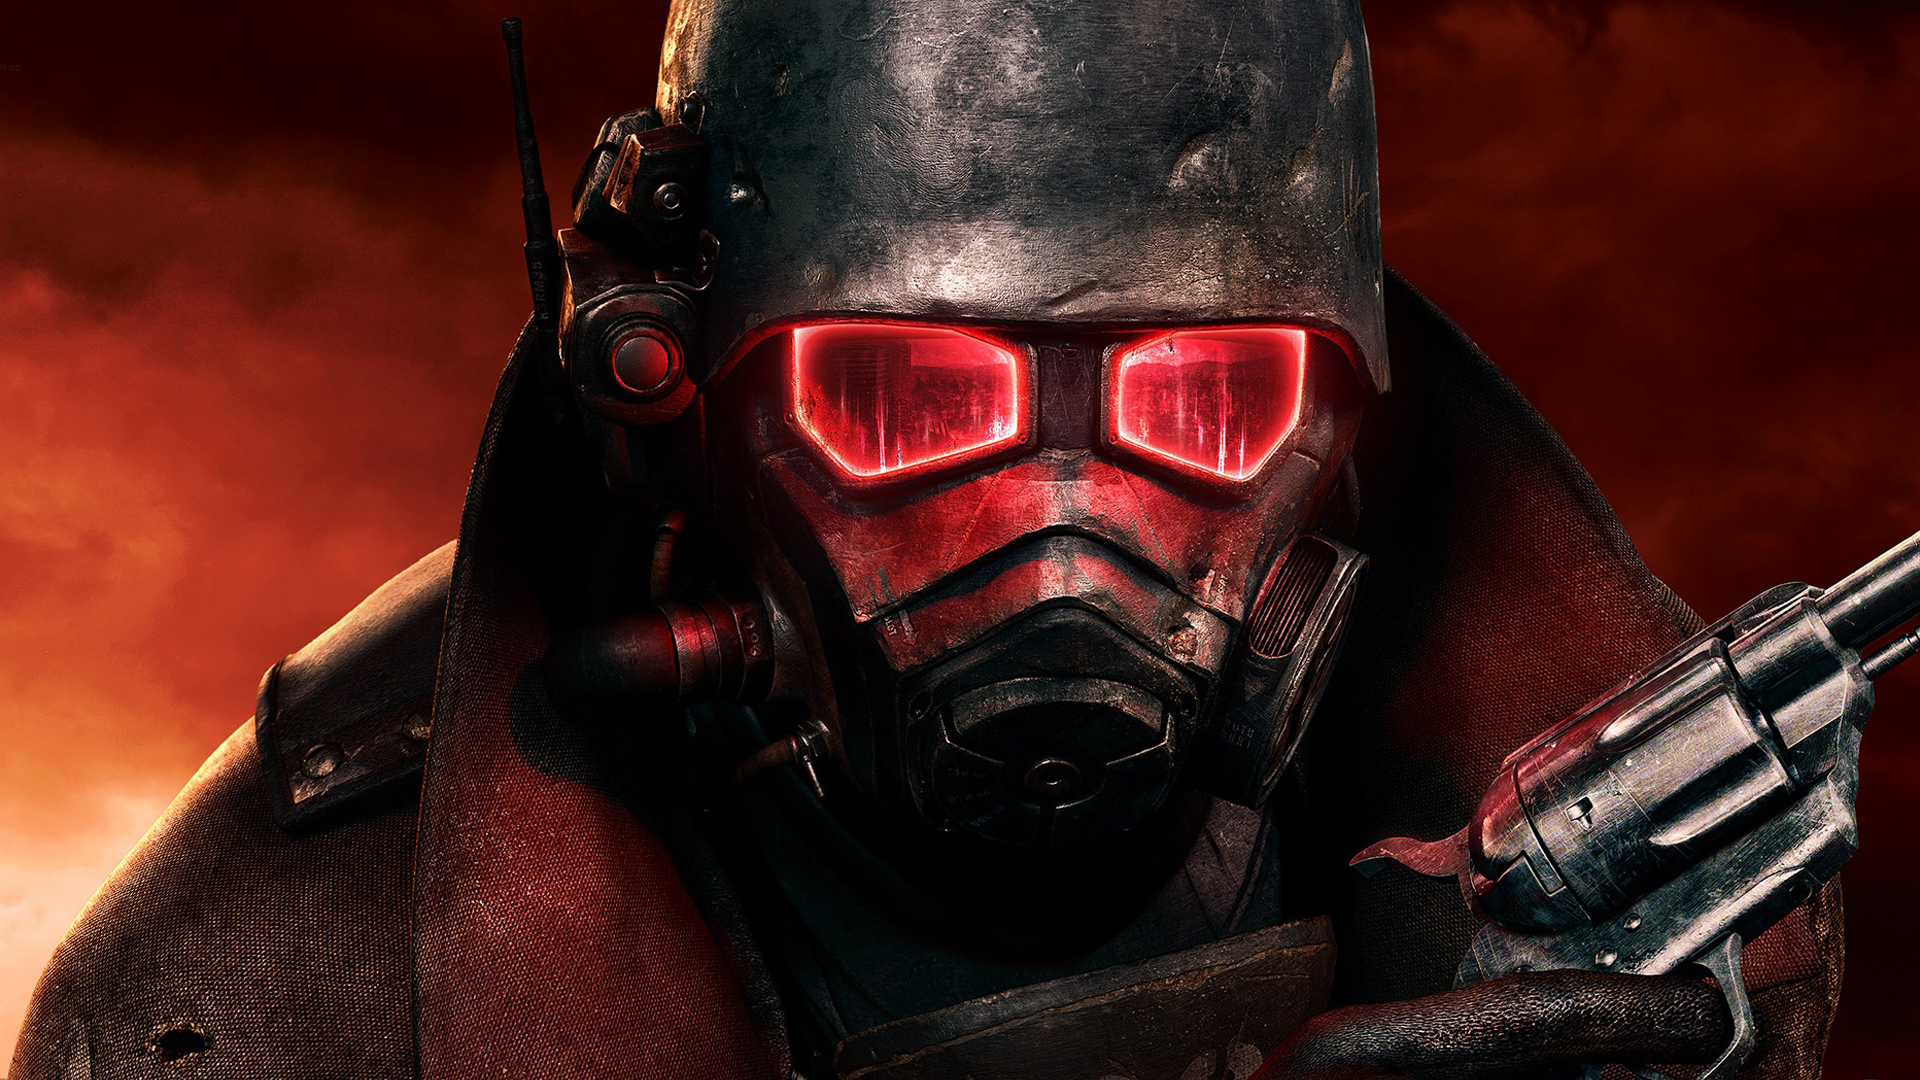 Best Mods for Fallout: New Vegas - The Escapist